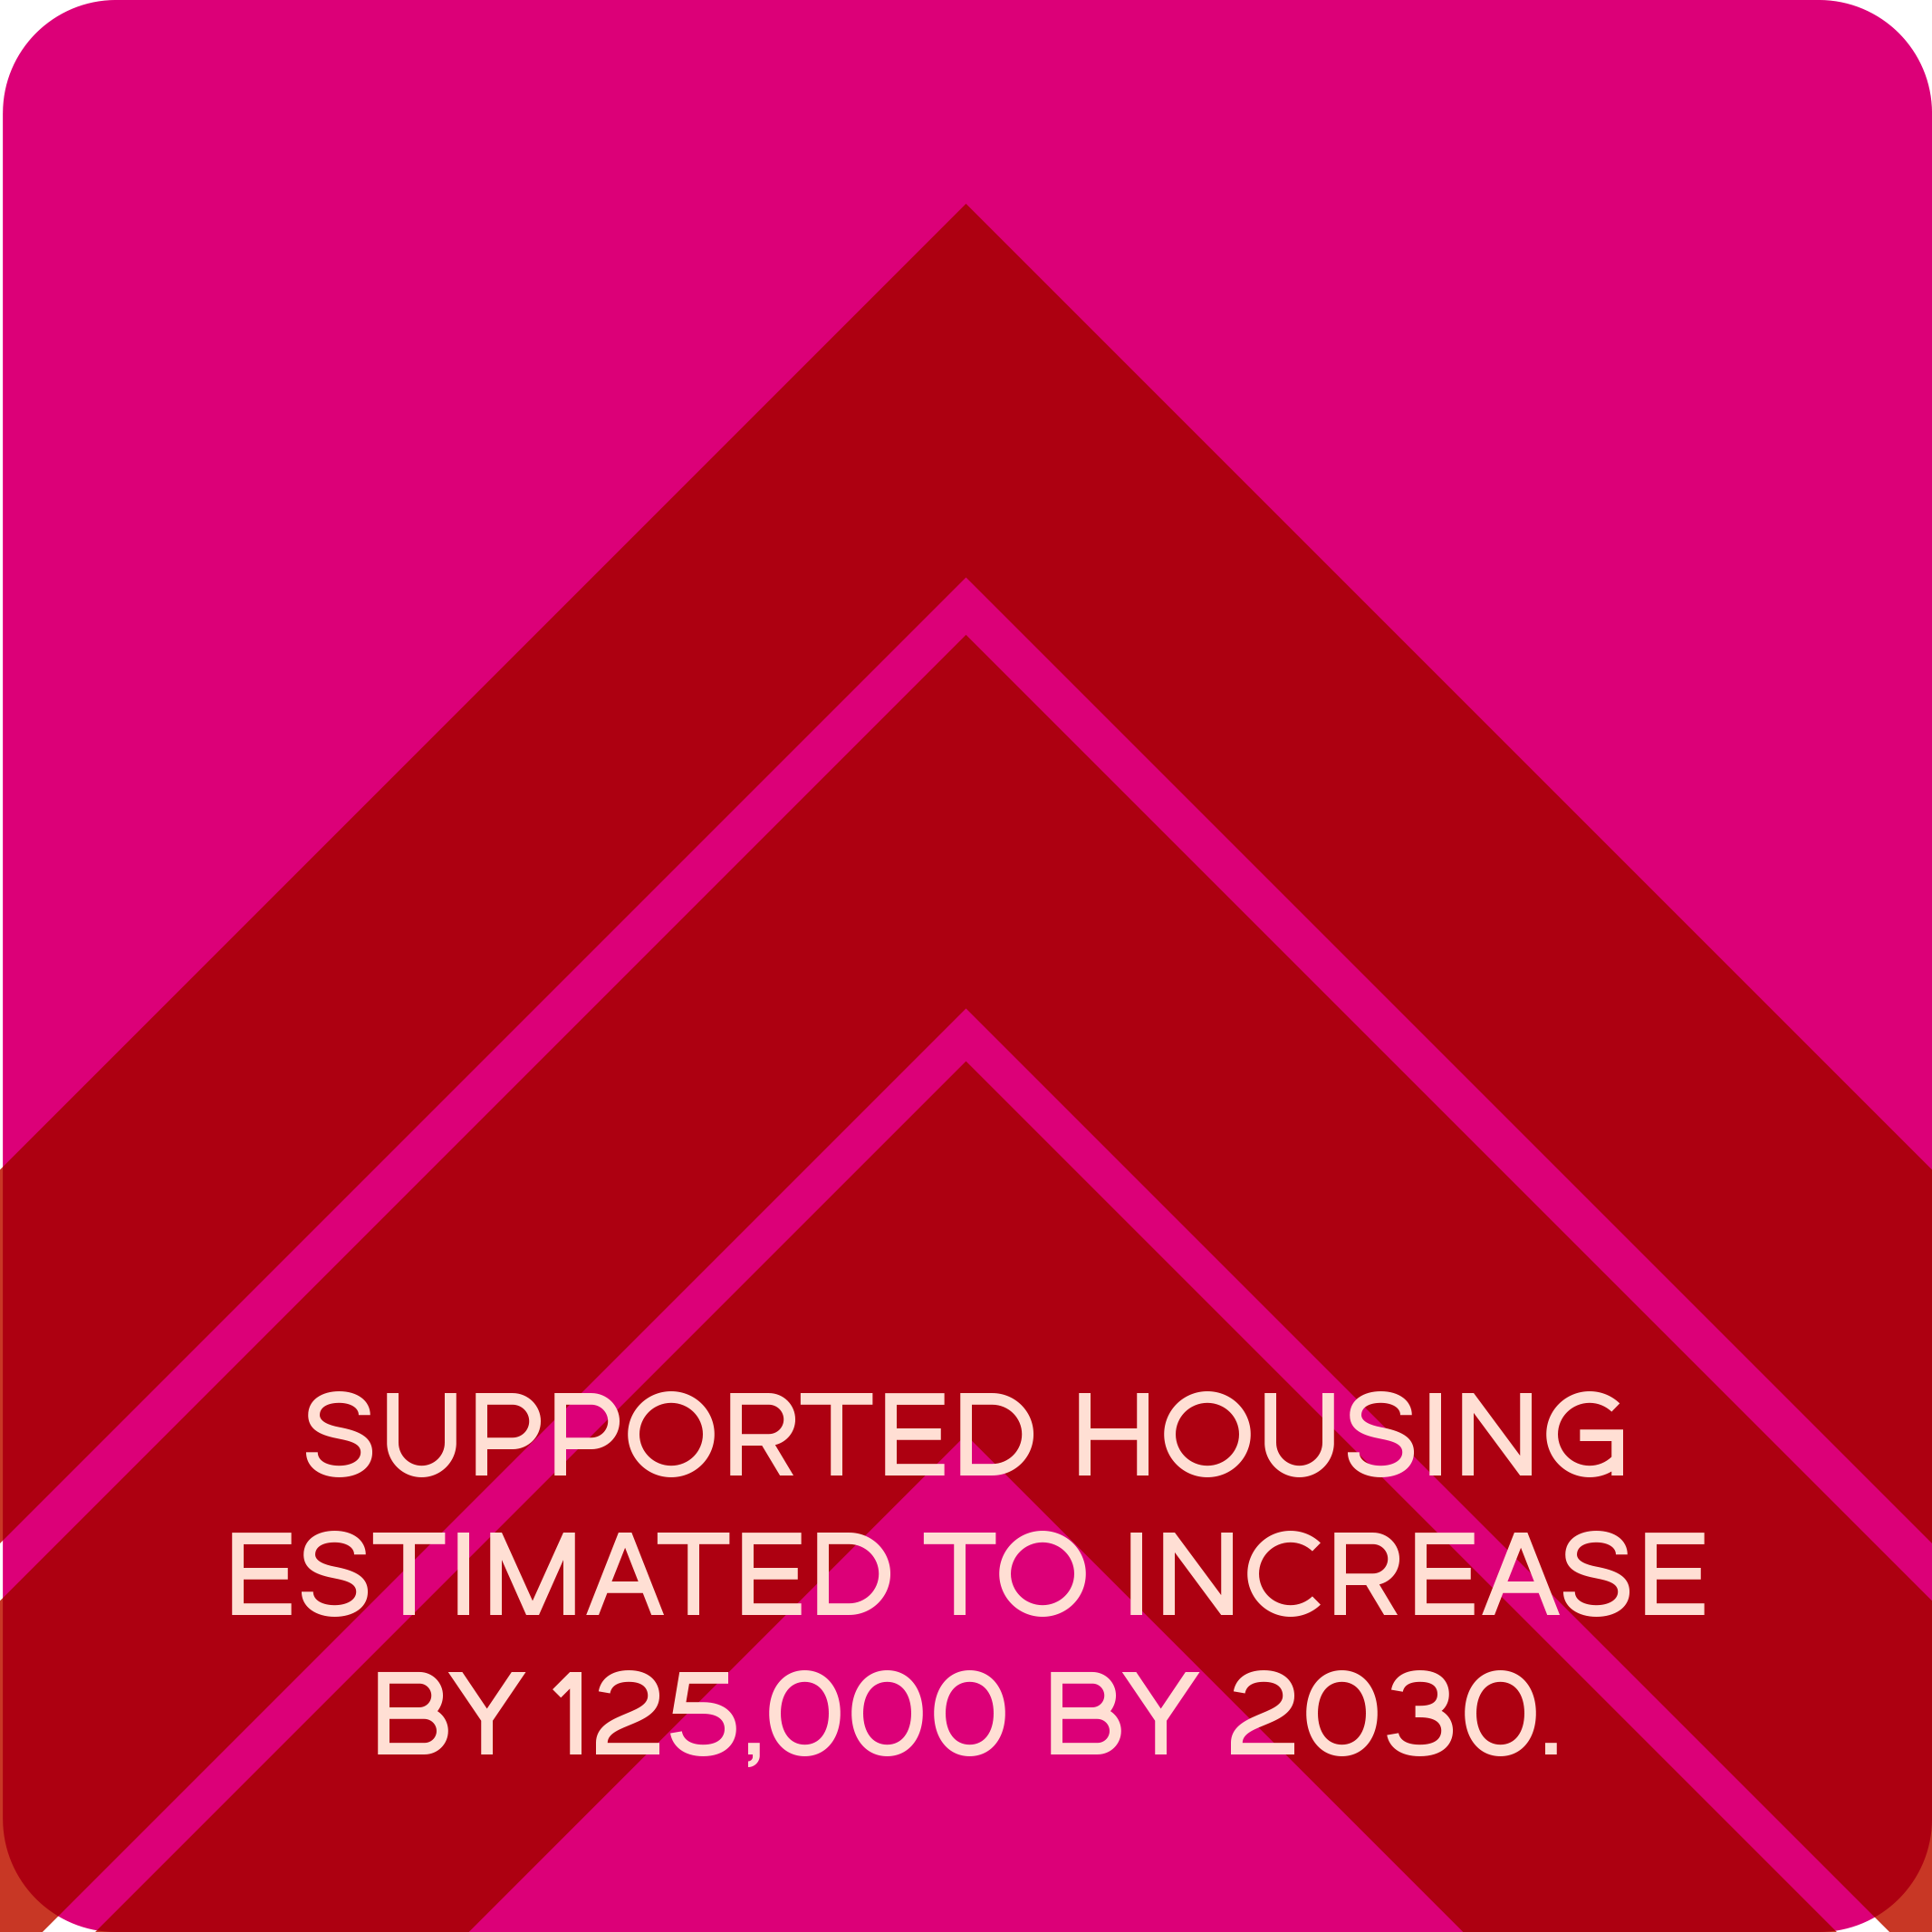 Supported housing estimated to increase by 125,000 by 2030